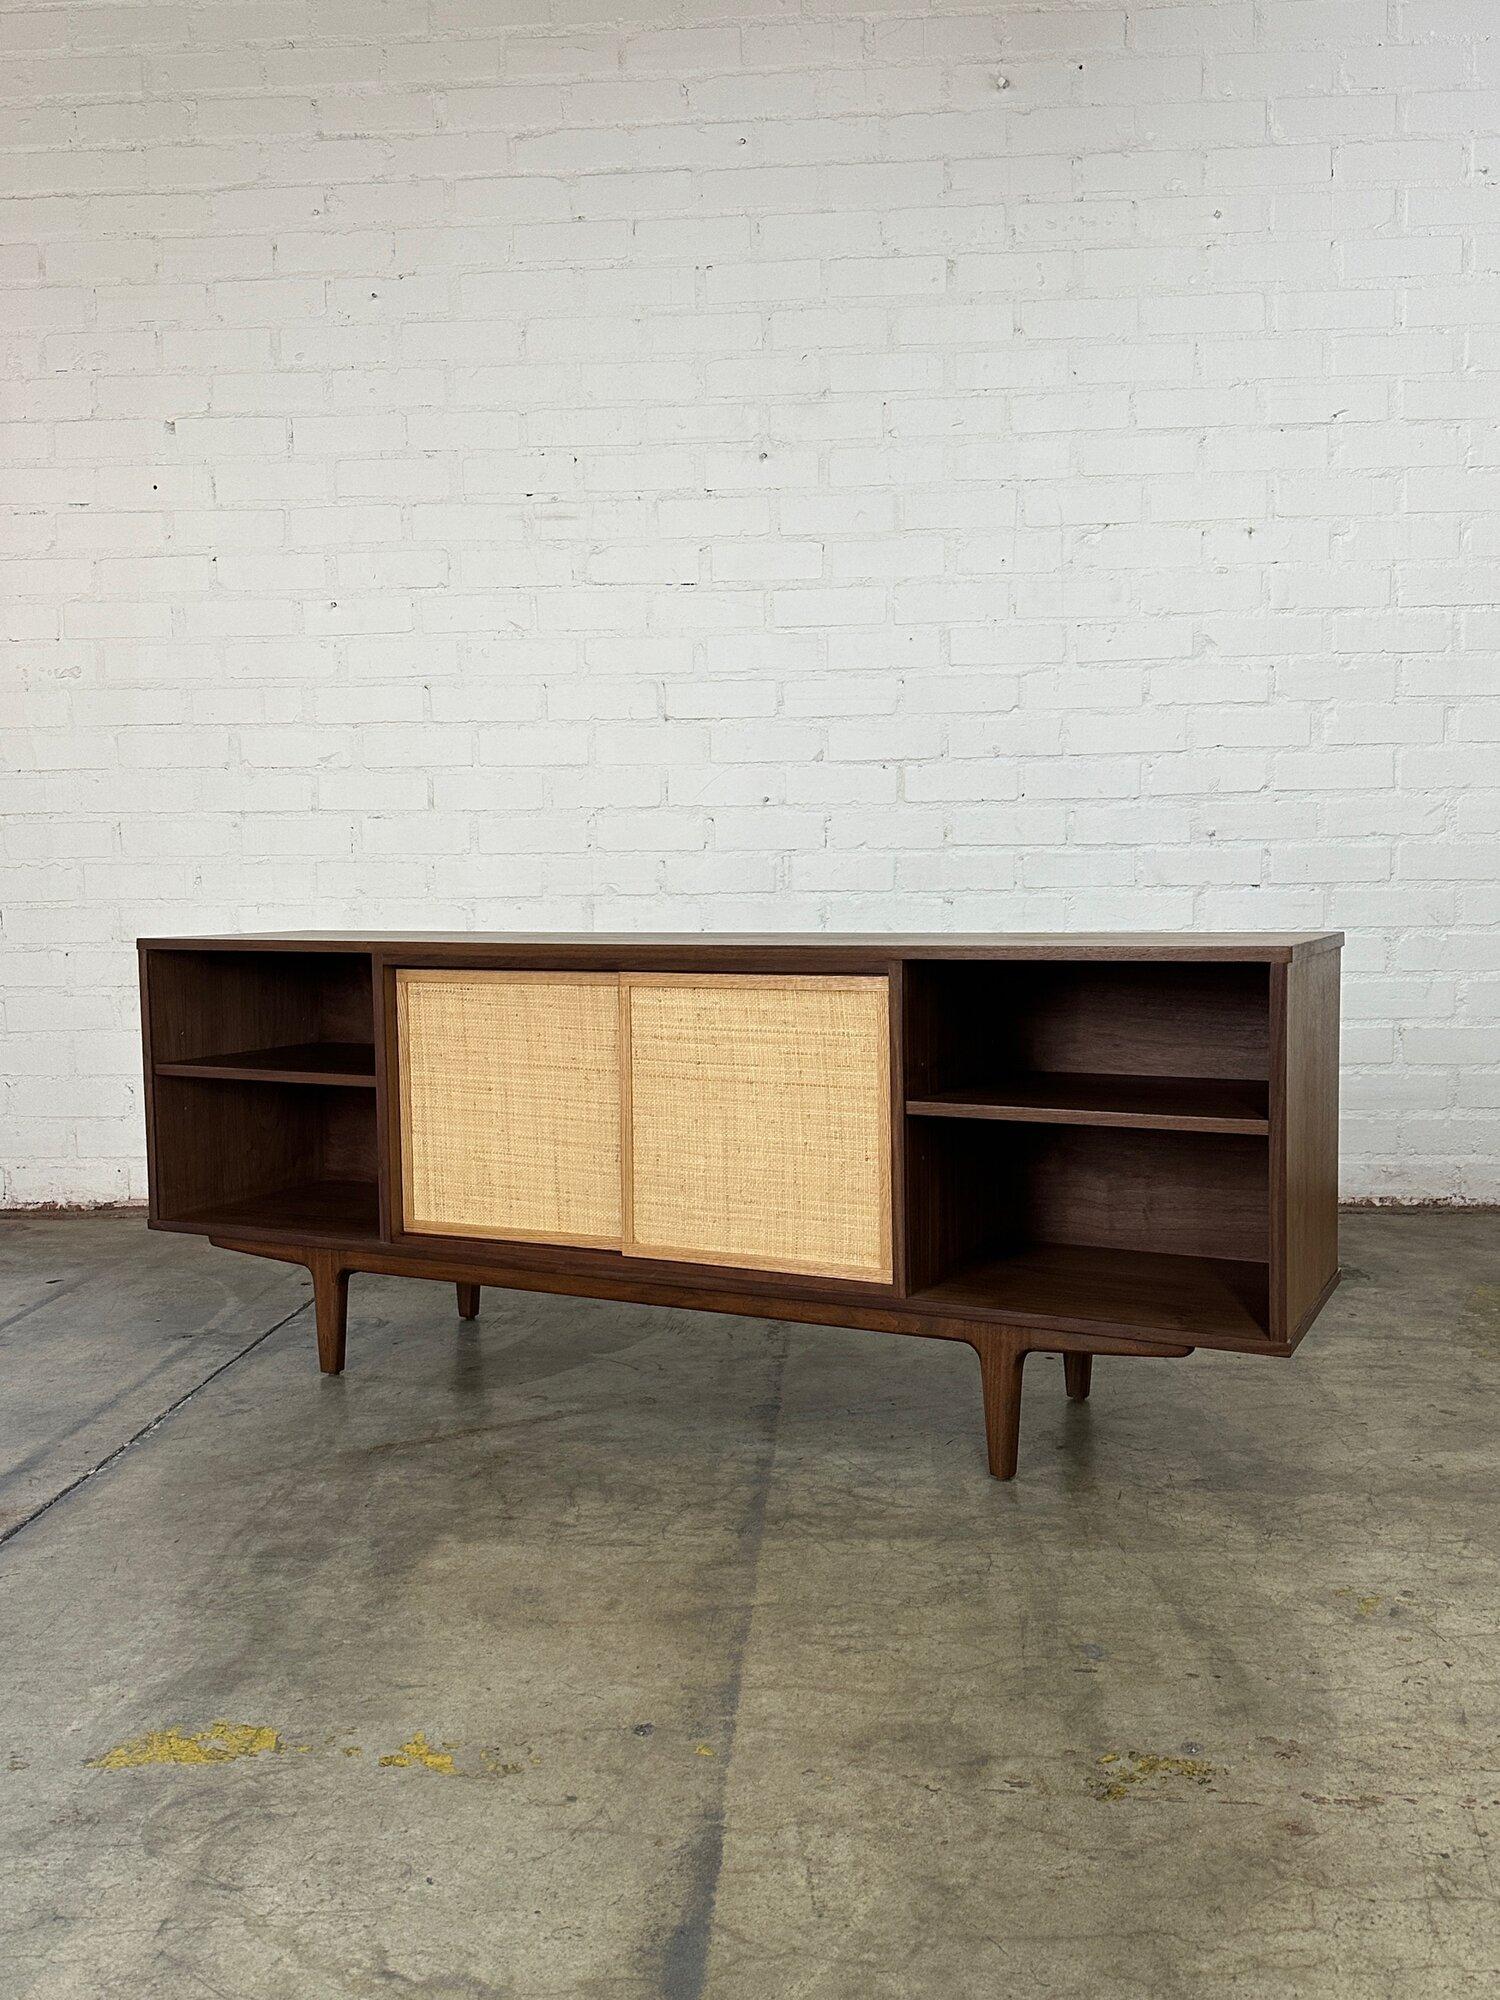 W72.5 D16 H27.5

Two toned Custom made credenza made from a mixture of solid wood and walnut veneer. Credenza features symmetrical design with a shelf on each side and two white oak cane paneled sliding doors that slide to reveal another